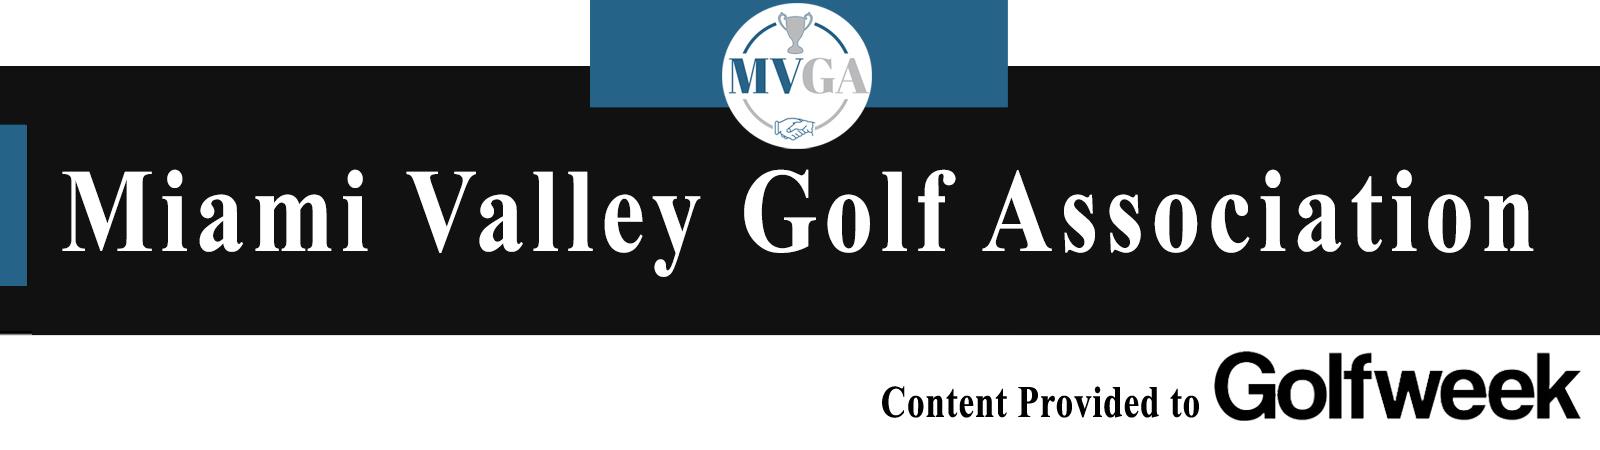 Content_Banner_to_Golfweek